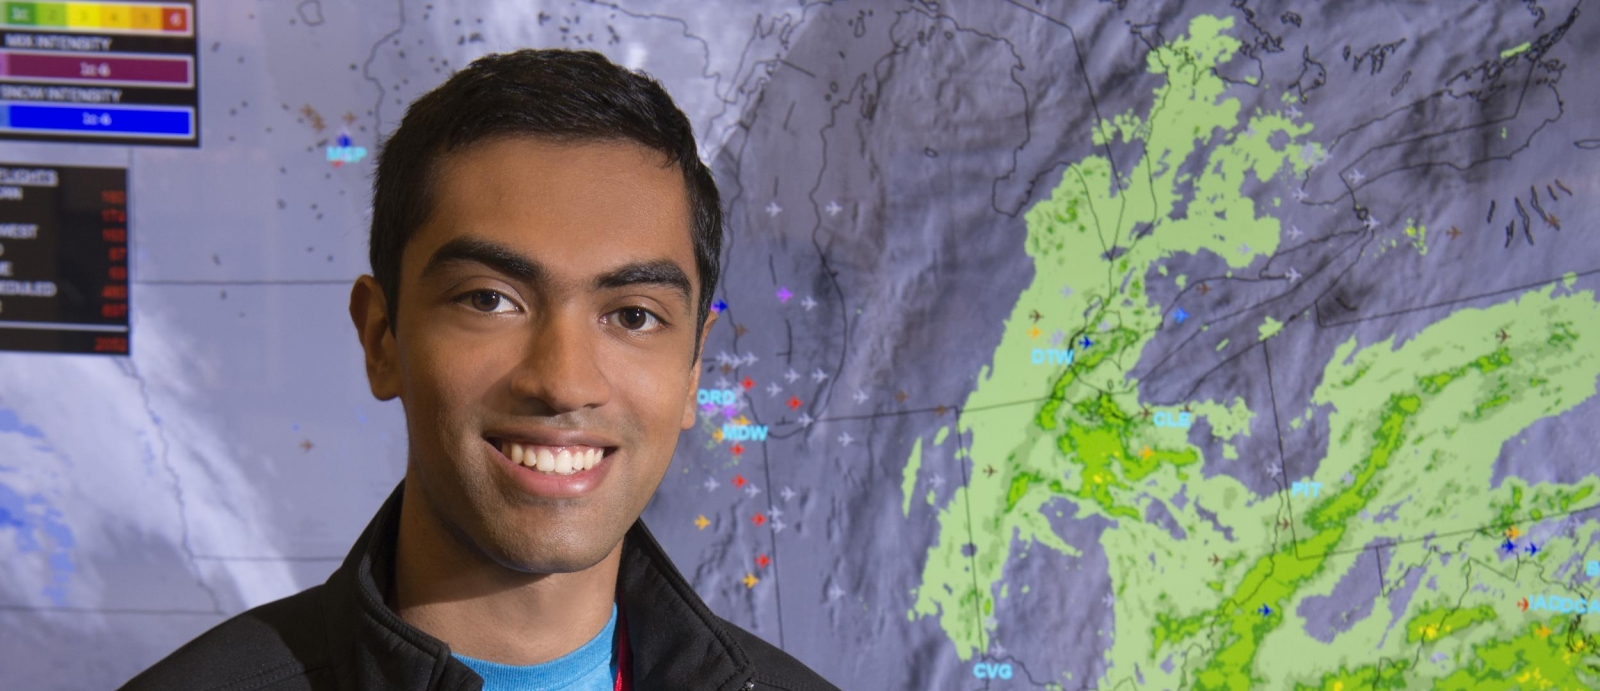 MIT student Vivek Miglani worked on a project that simulates weather radar images for air traffic controllers, modifying the team’s existing neural network model and running experiments to identify possible improvements.